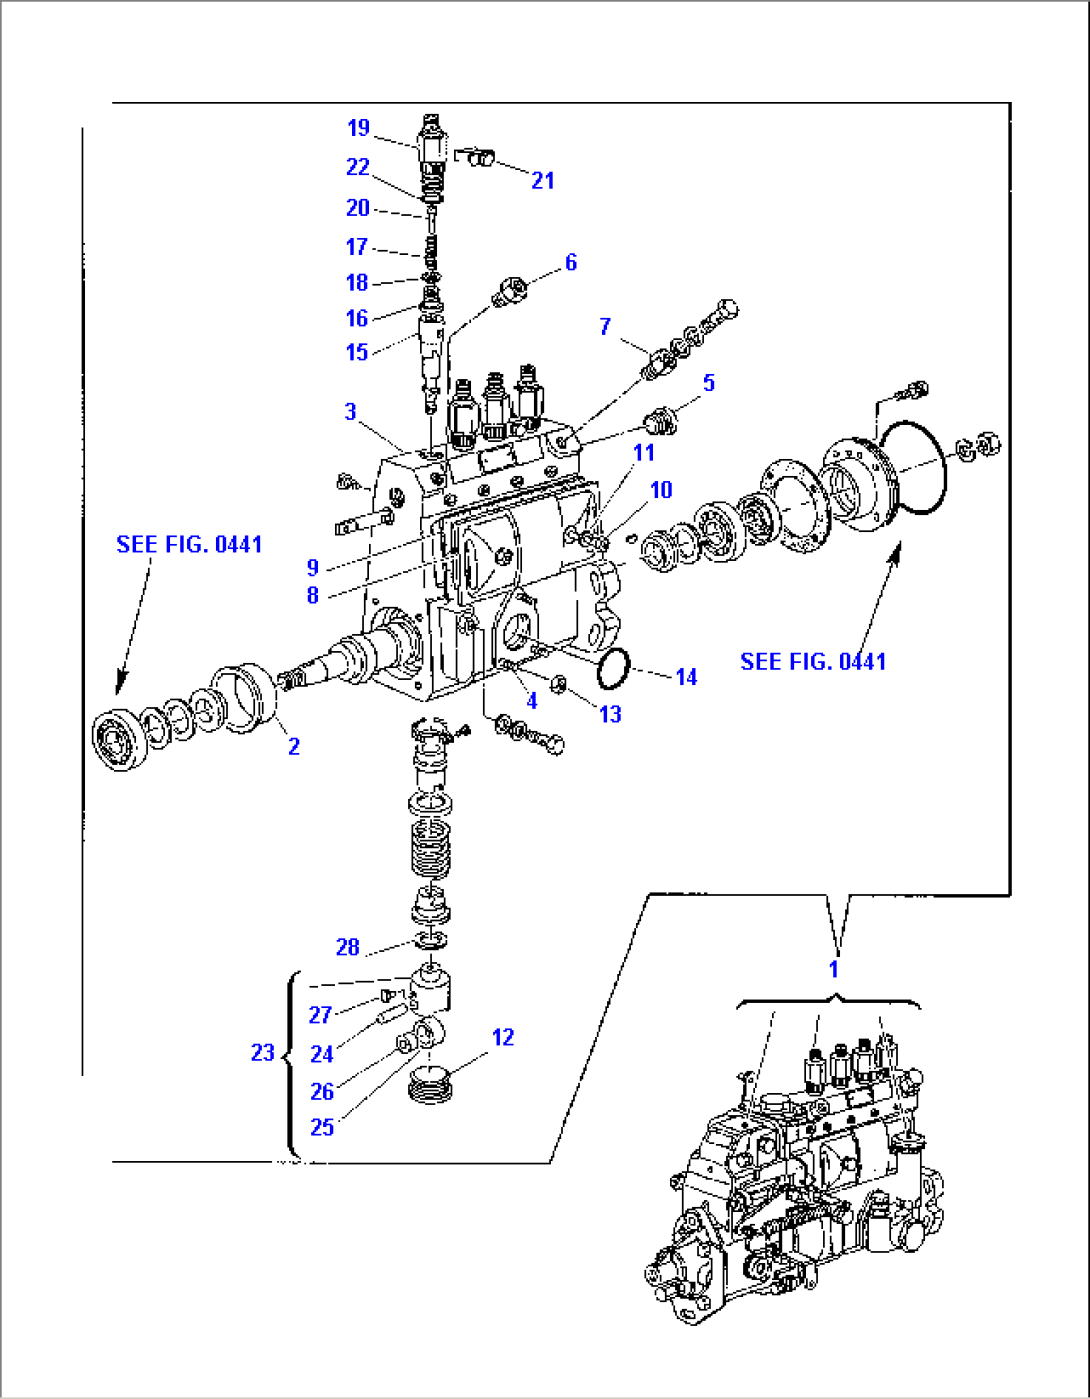 FUEL INJECTION PUMP (1/2)